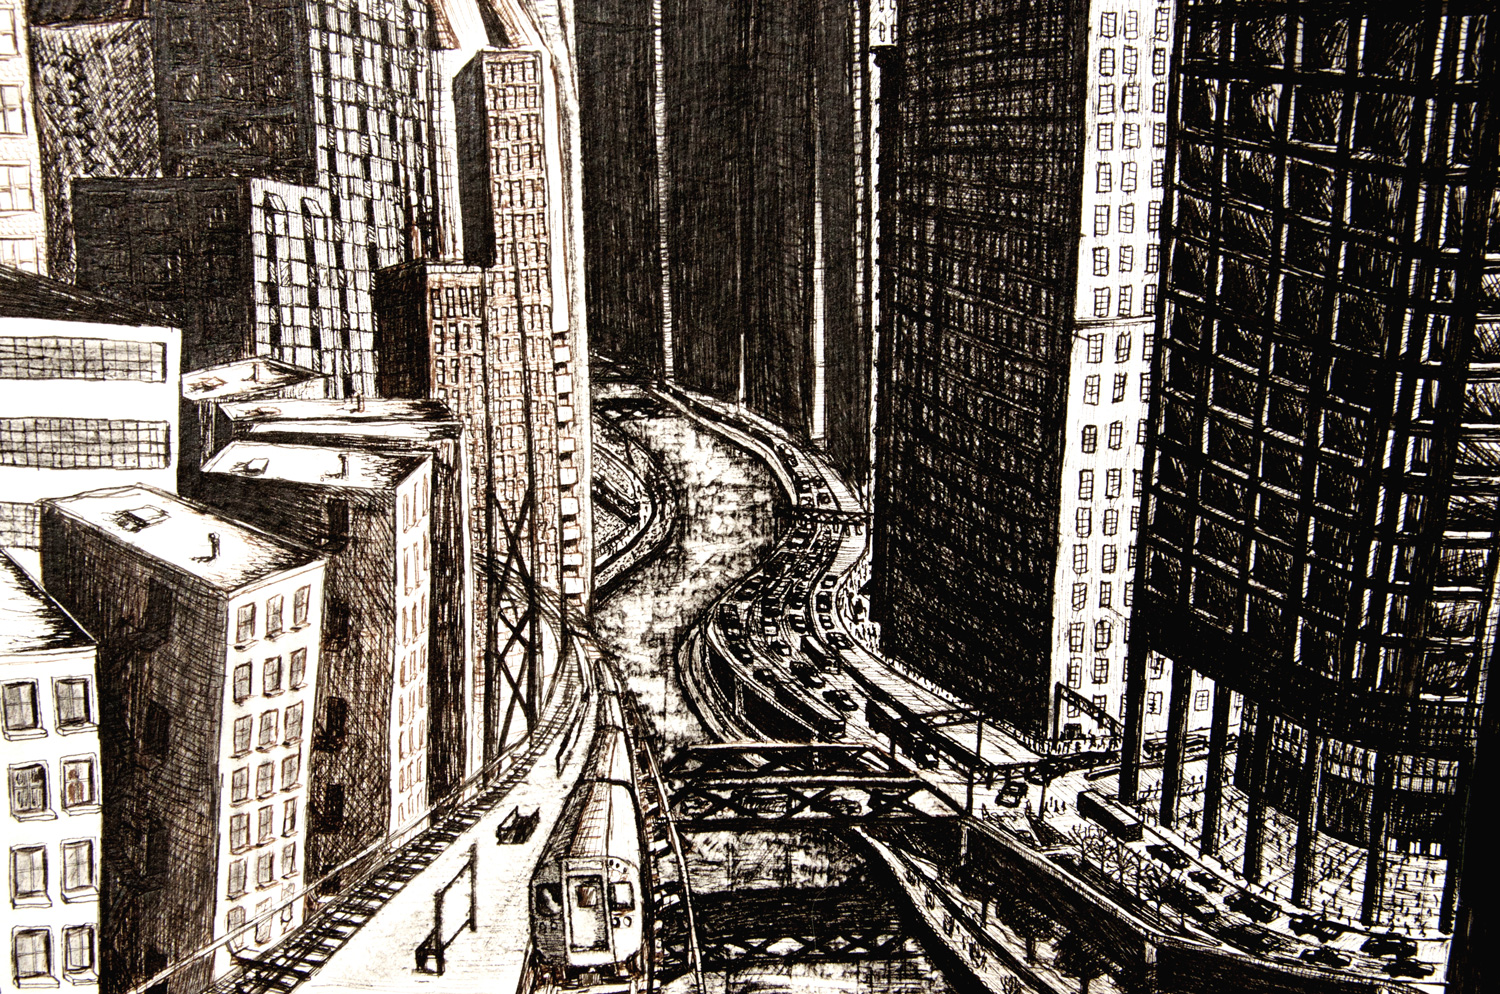 The Turbulent City drawing (Chicago imaginary cityscape), by Billy Reiter